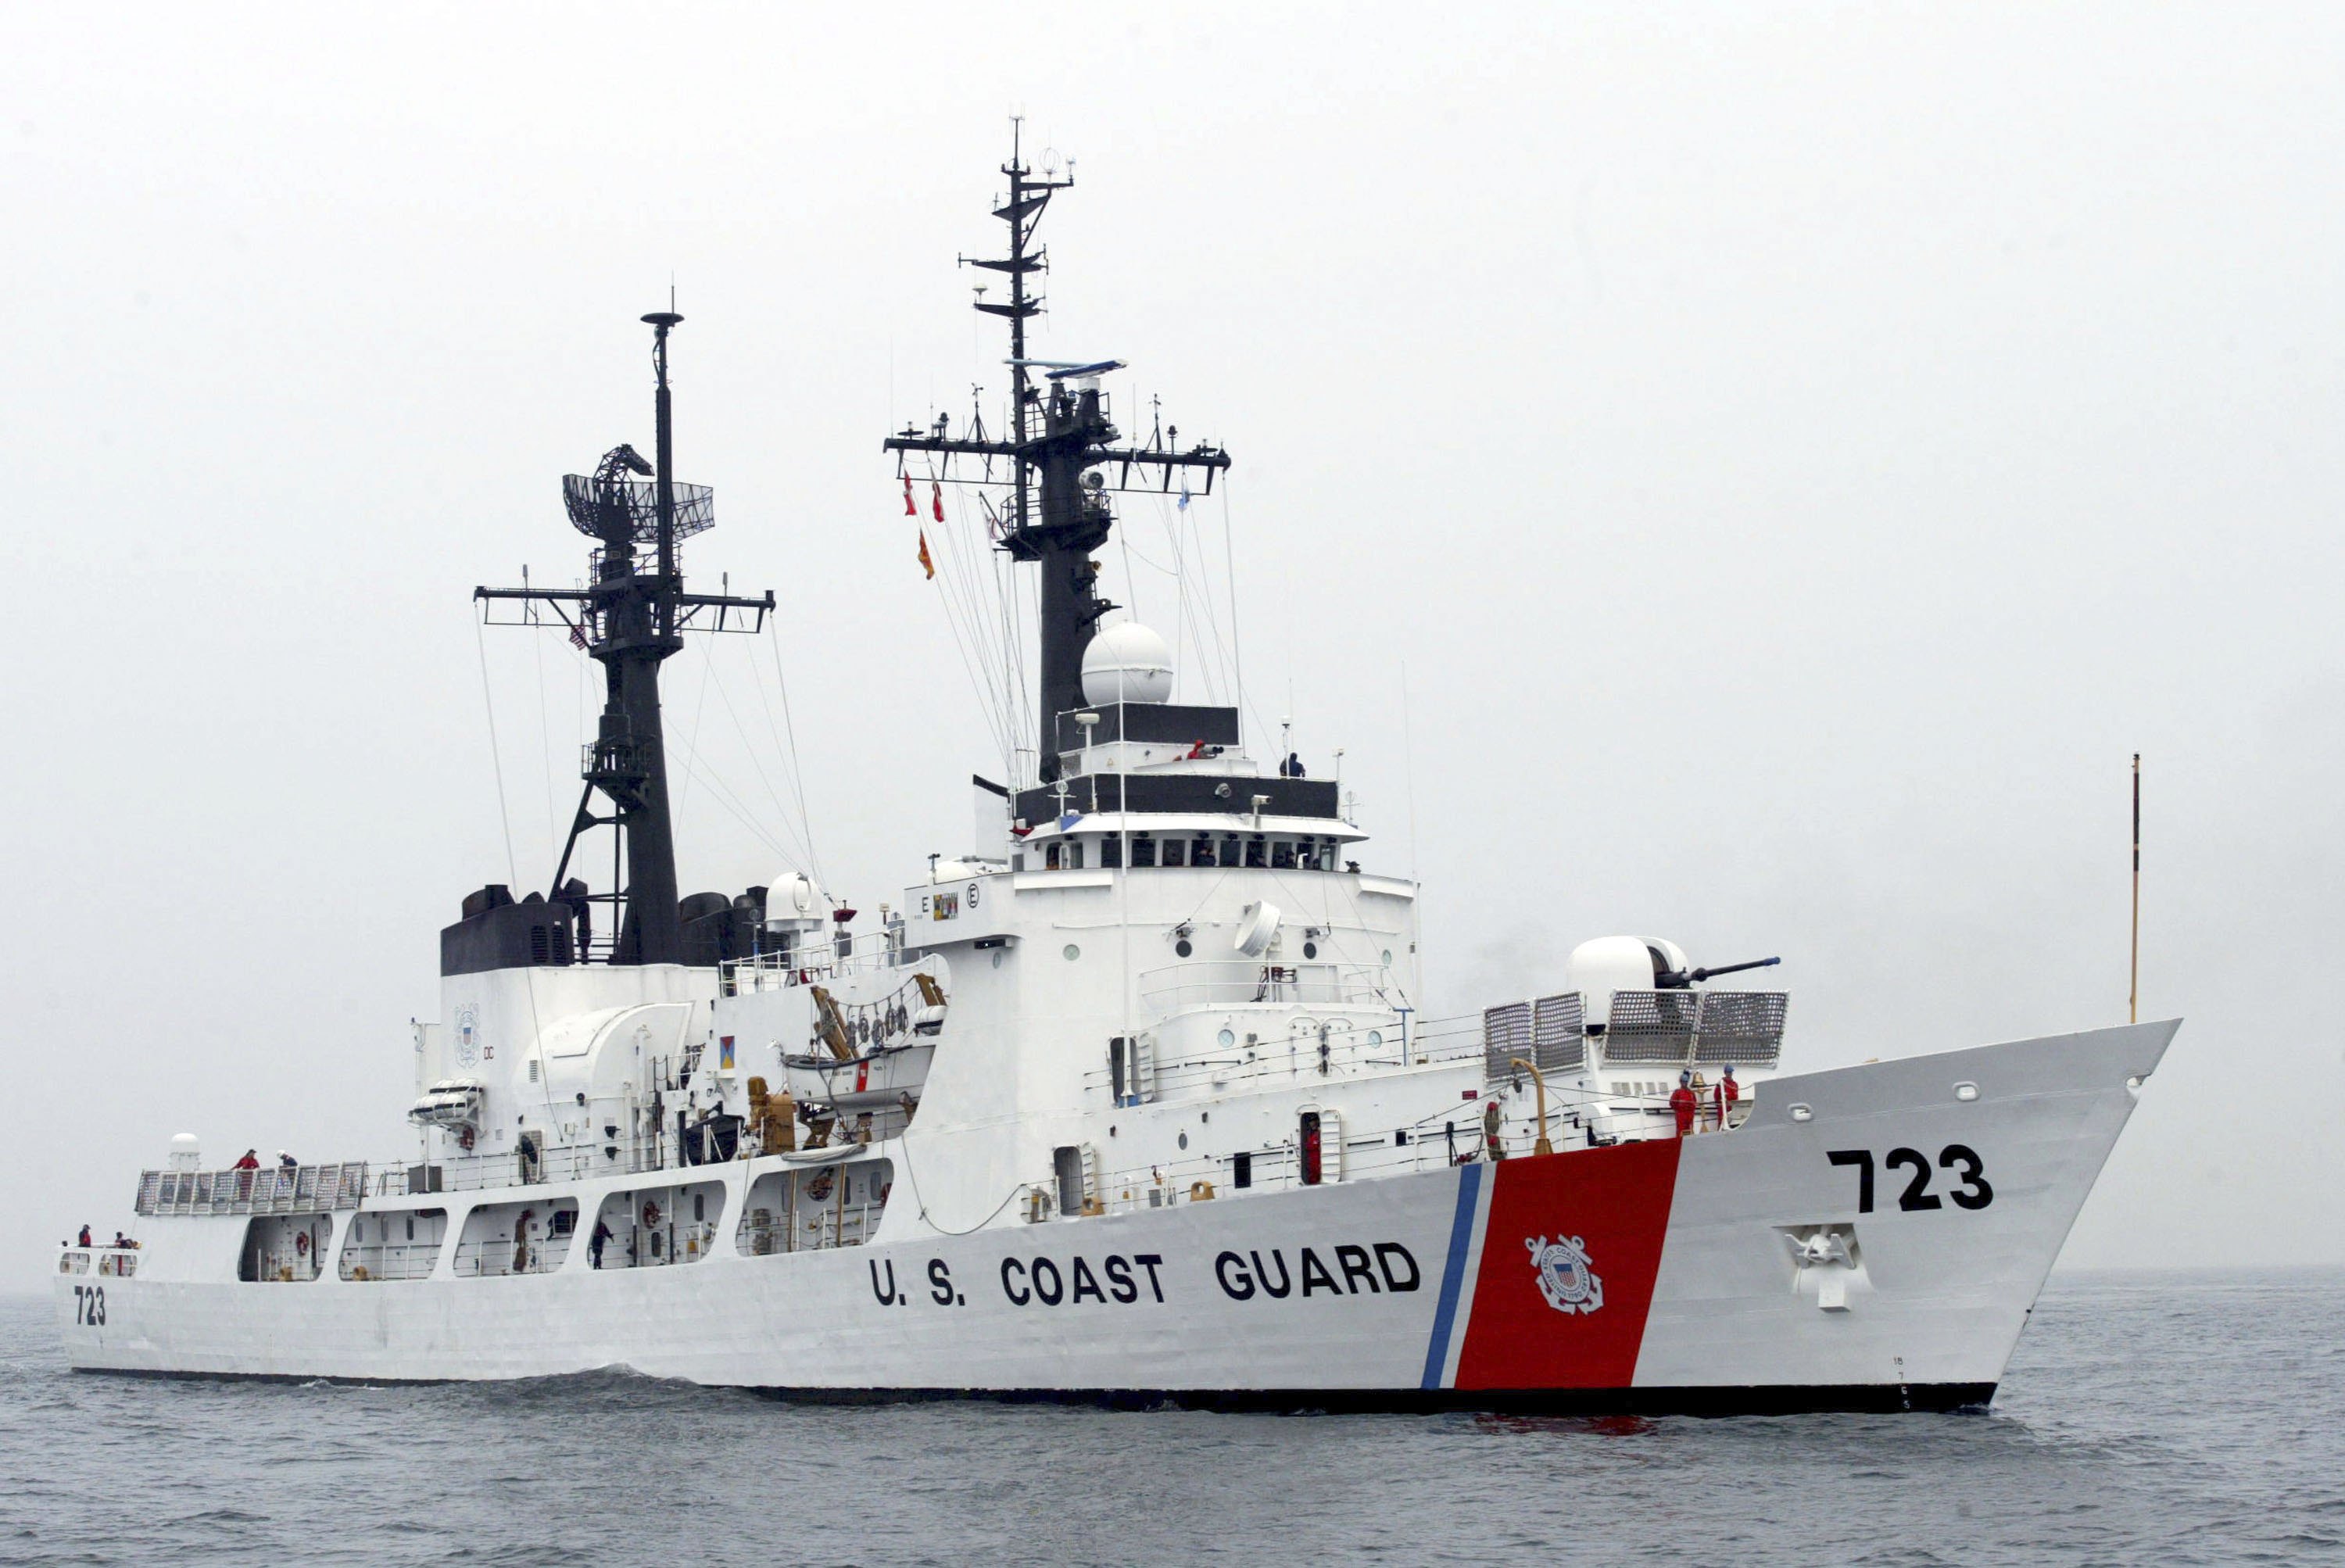 The U.S. Coast Guard has been operating floating detainment centers